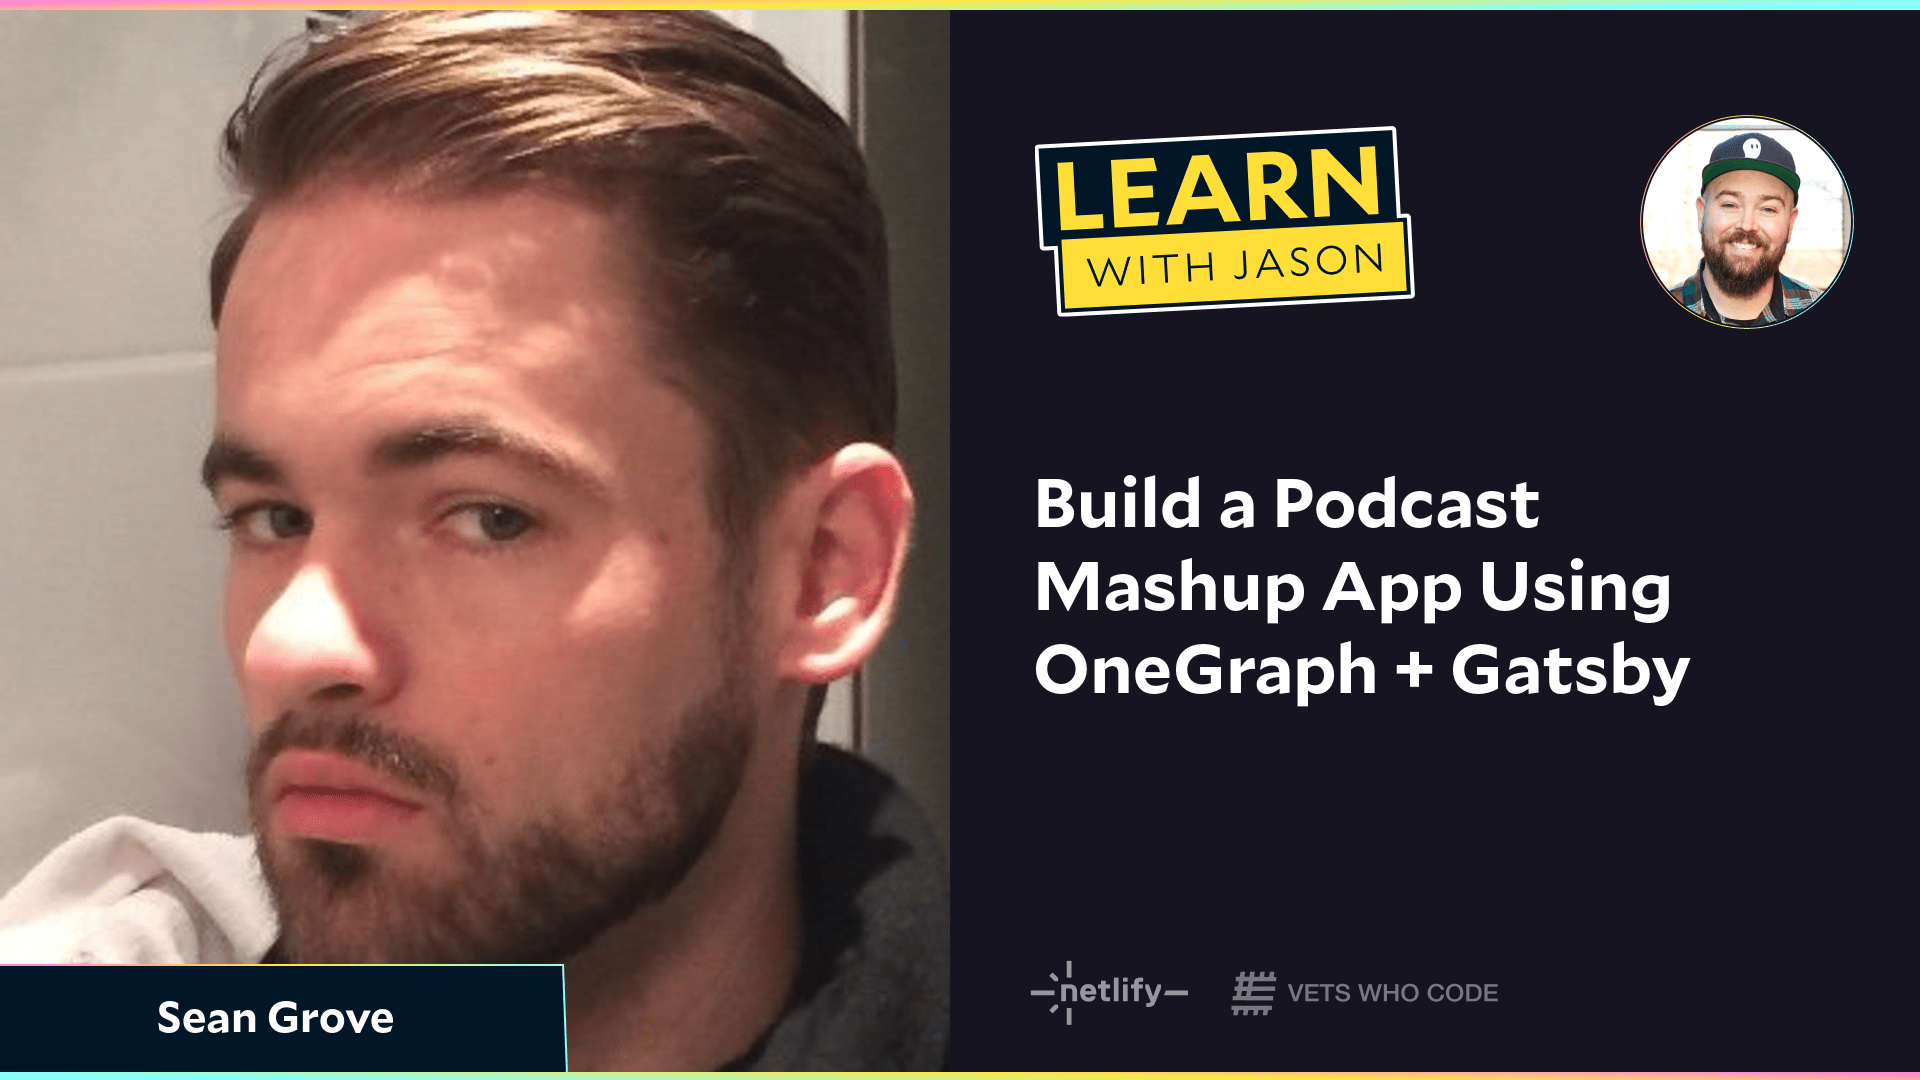 Build a Podcast Mashup App Using OneGraph + Gatsby (with Sean Grove)